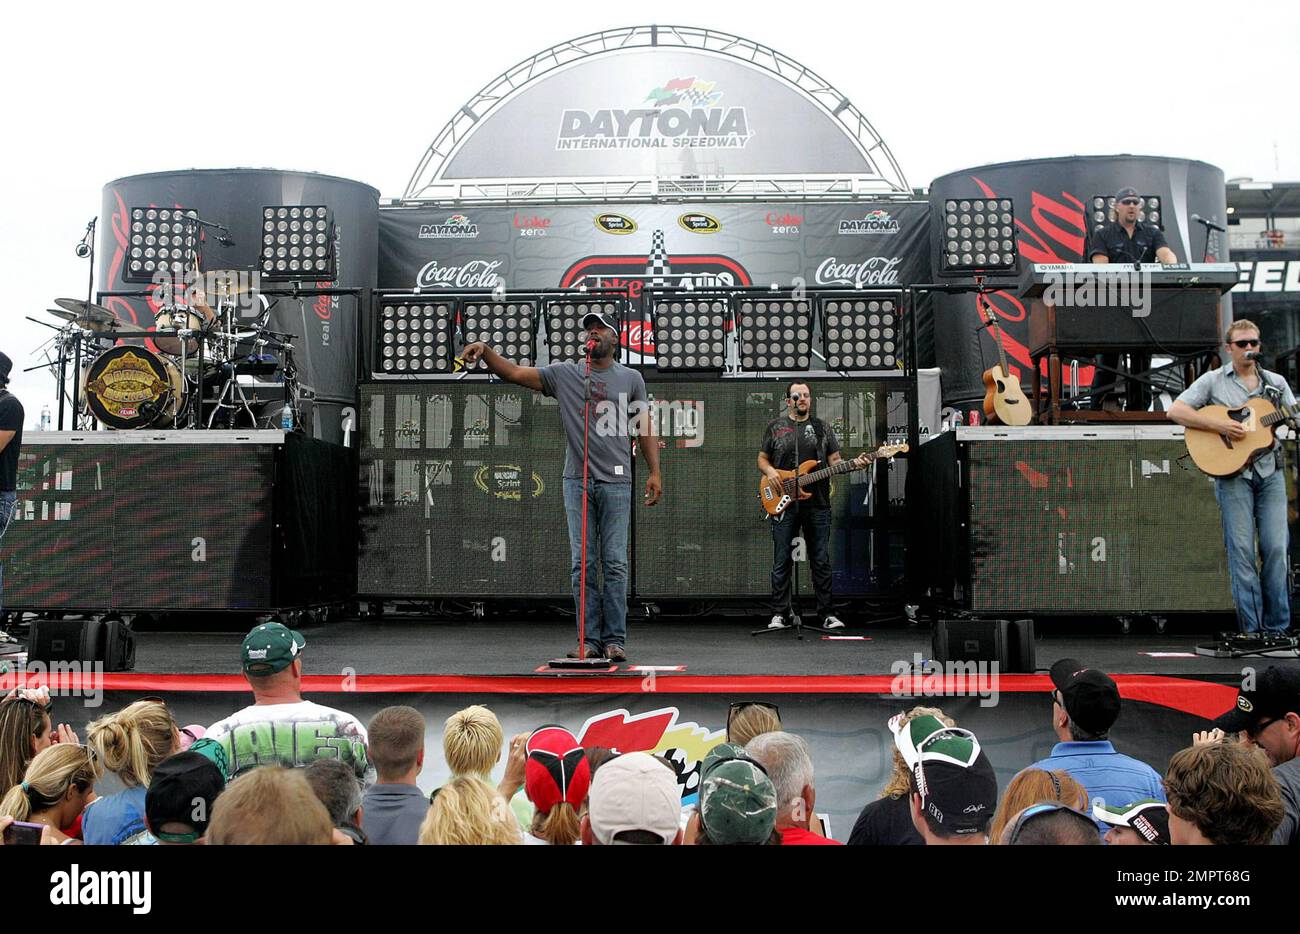 Lead singer of Hootie & the Blowfish and CMA New Artist of the Year winner, Darius Rucker performs live in the rain prior to the NASCAR Coke Zero 400 at Daytona International Speedway.  Despite the drizzle the rock-turned-country singer seemed happy as he moved around the stage singing and playing his guitar. Daytona Beach, FL. 07/03/10. Stock Photo